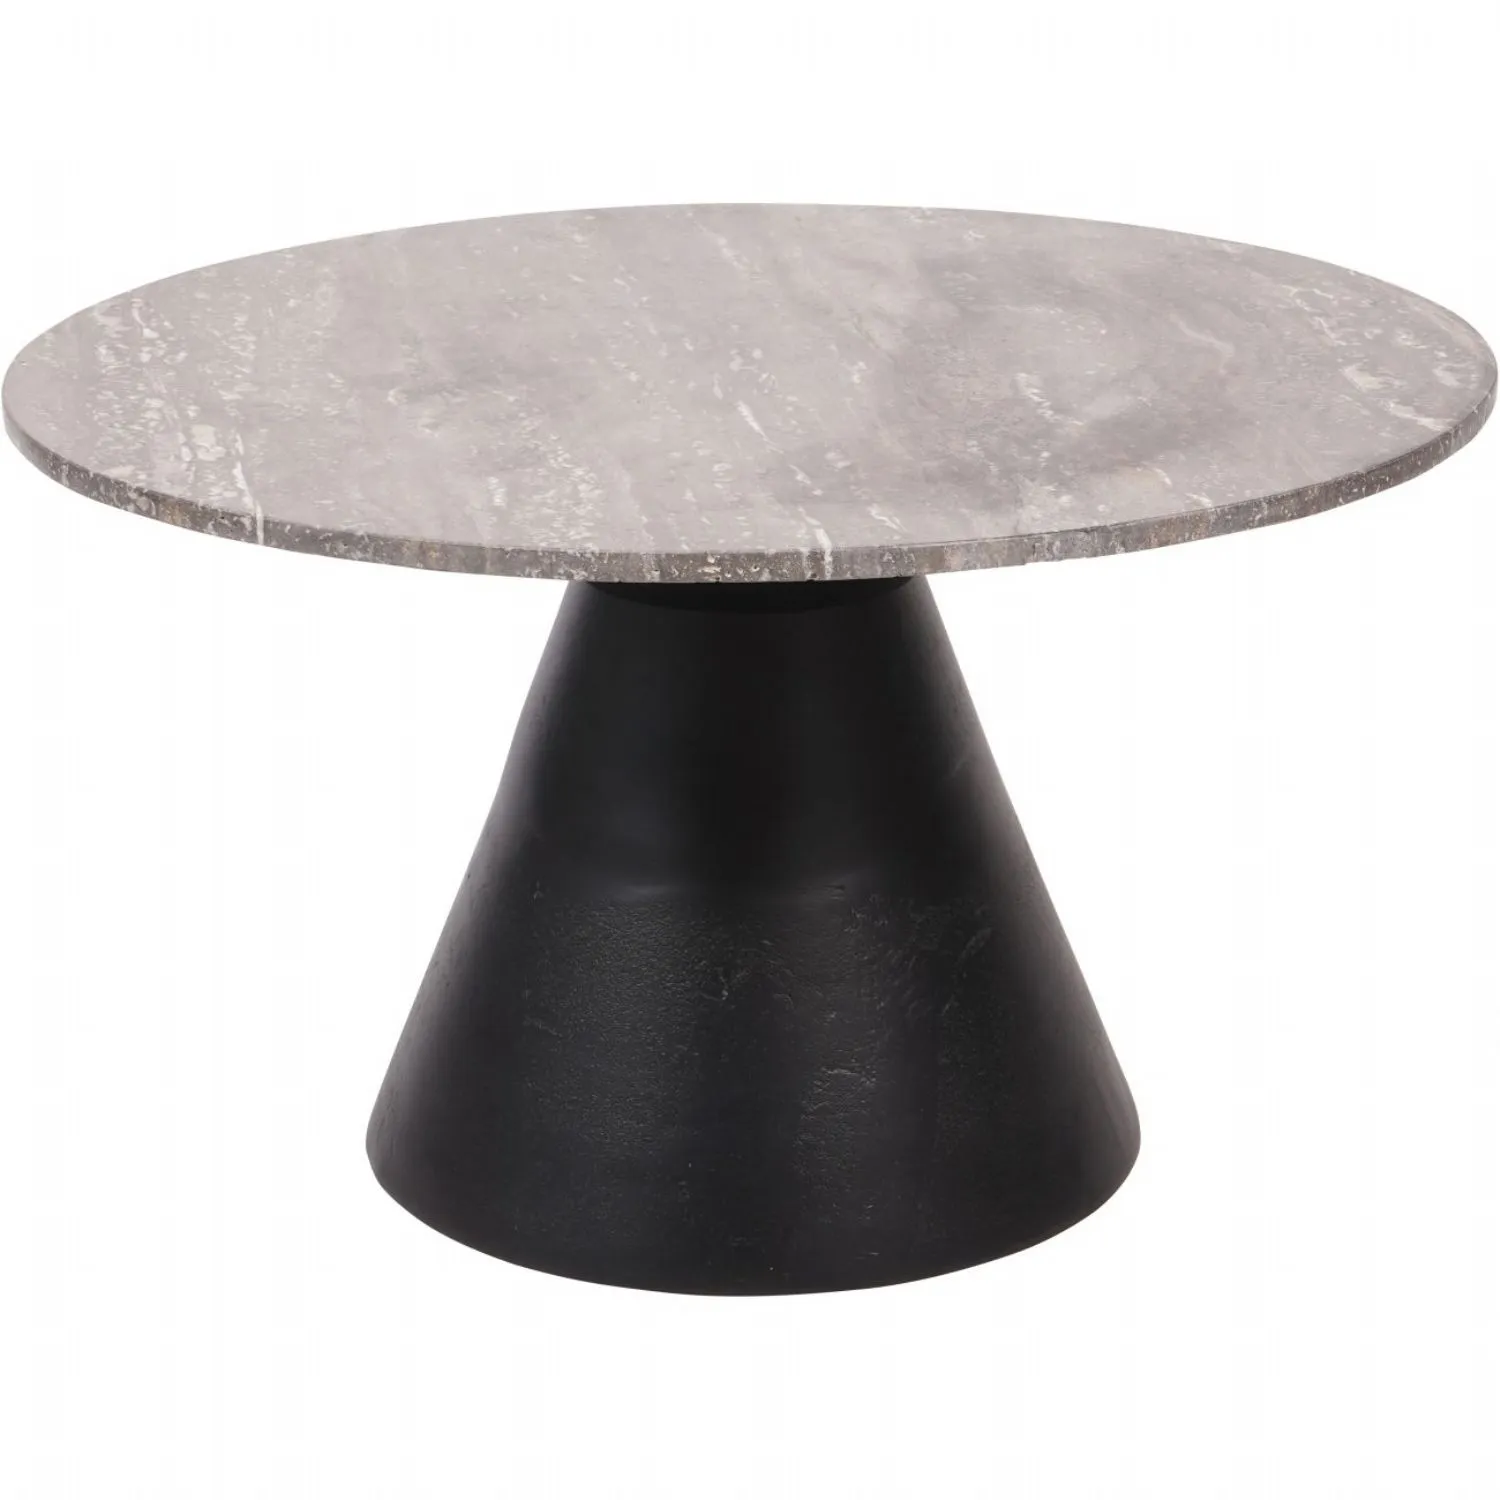 Clifton II Charcoal Black and Dark Travertine Coffee Table Large 75cm